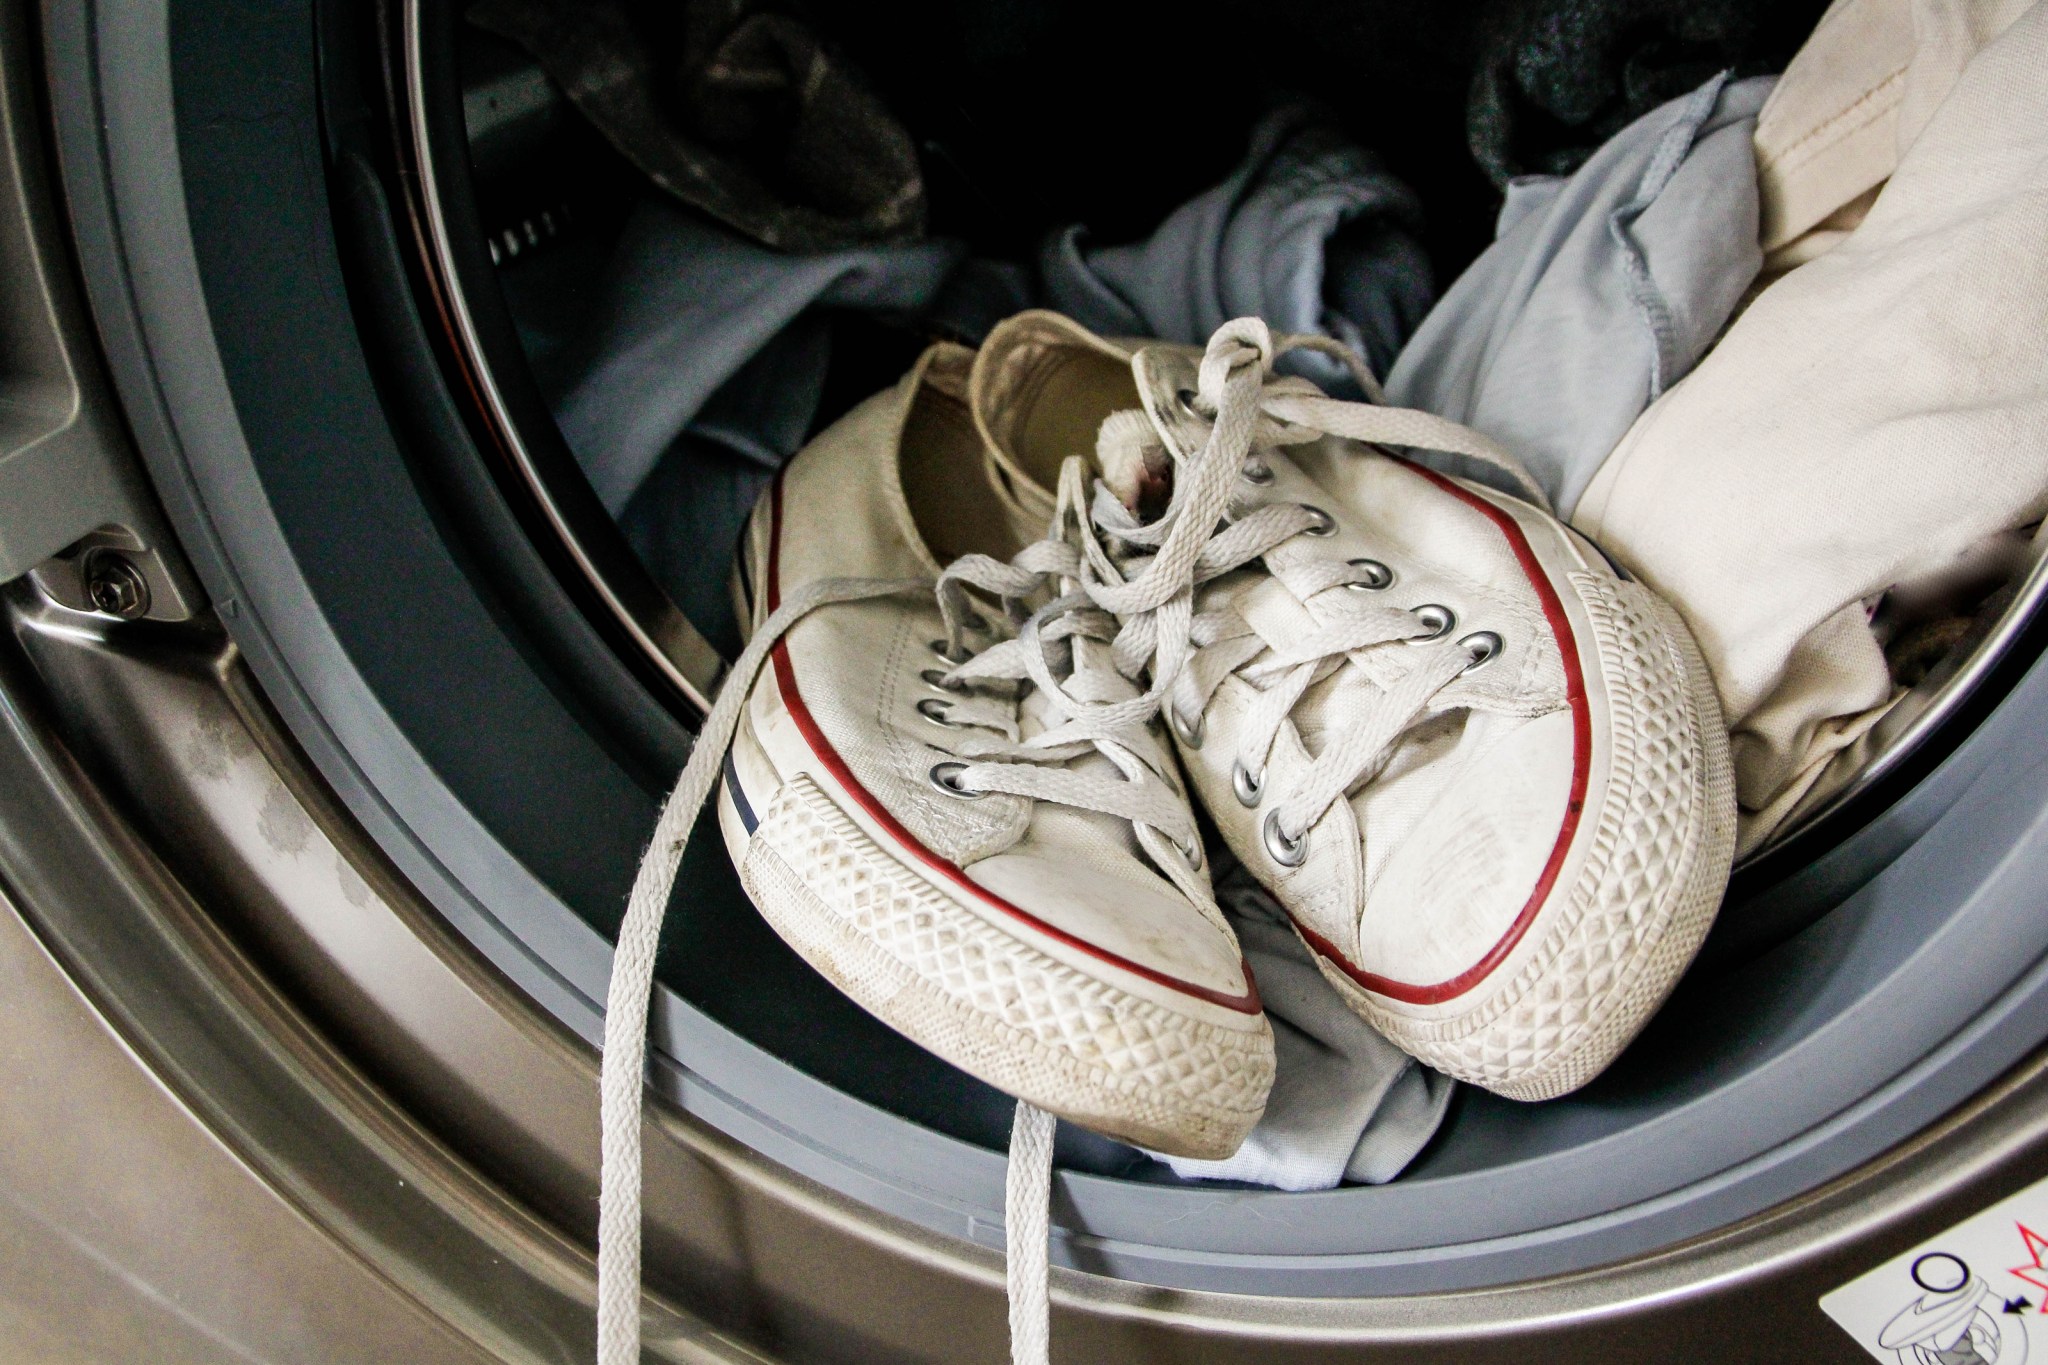 wash just about anything image of dirty white sneakers and t-shirts in a front load washing machine